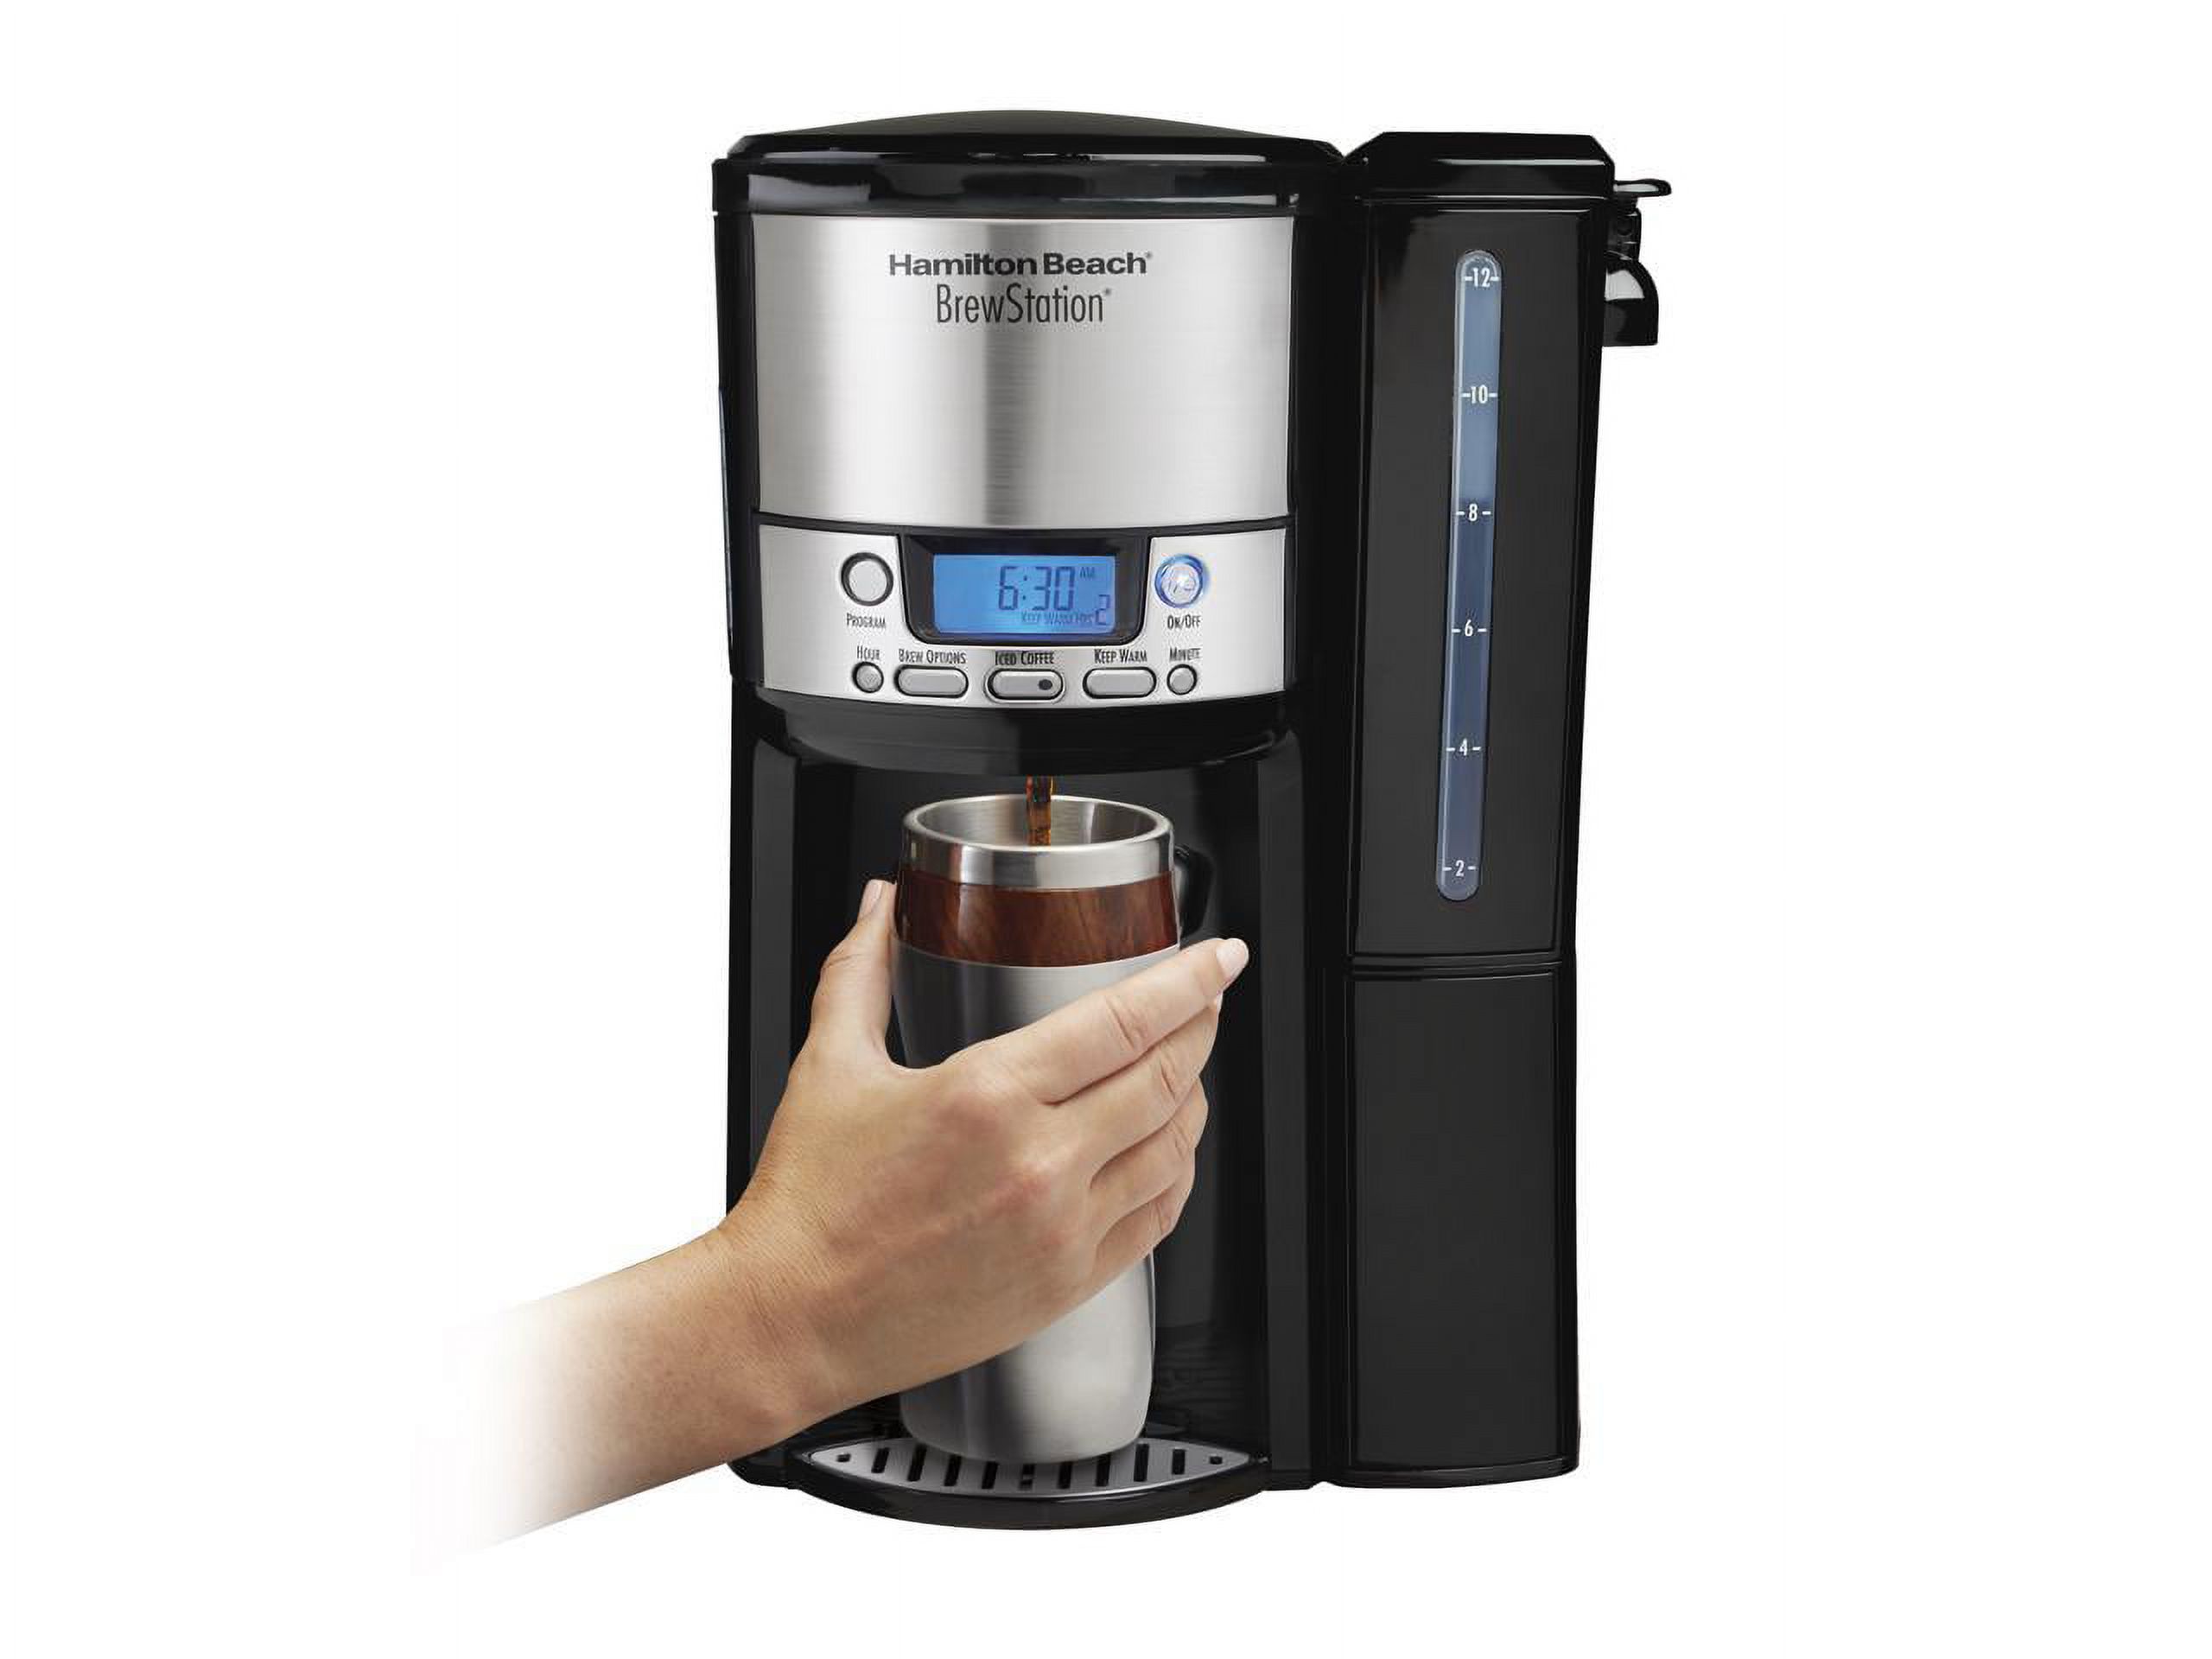 Hamilton Beach BrewStation 12 Cup Coffee Maker with Internal Heating, Black - image 3 of 6